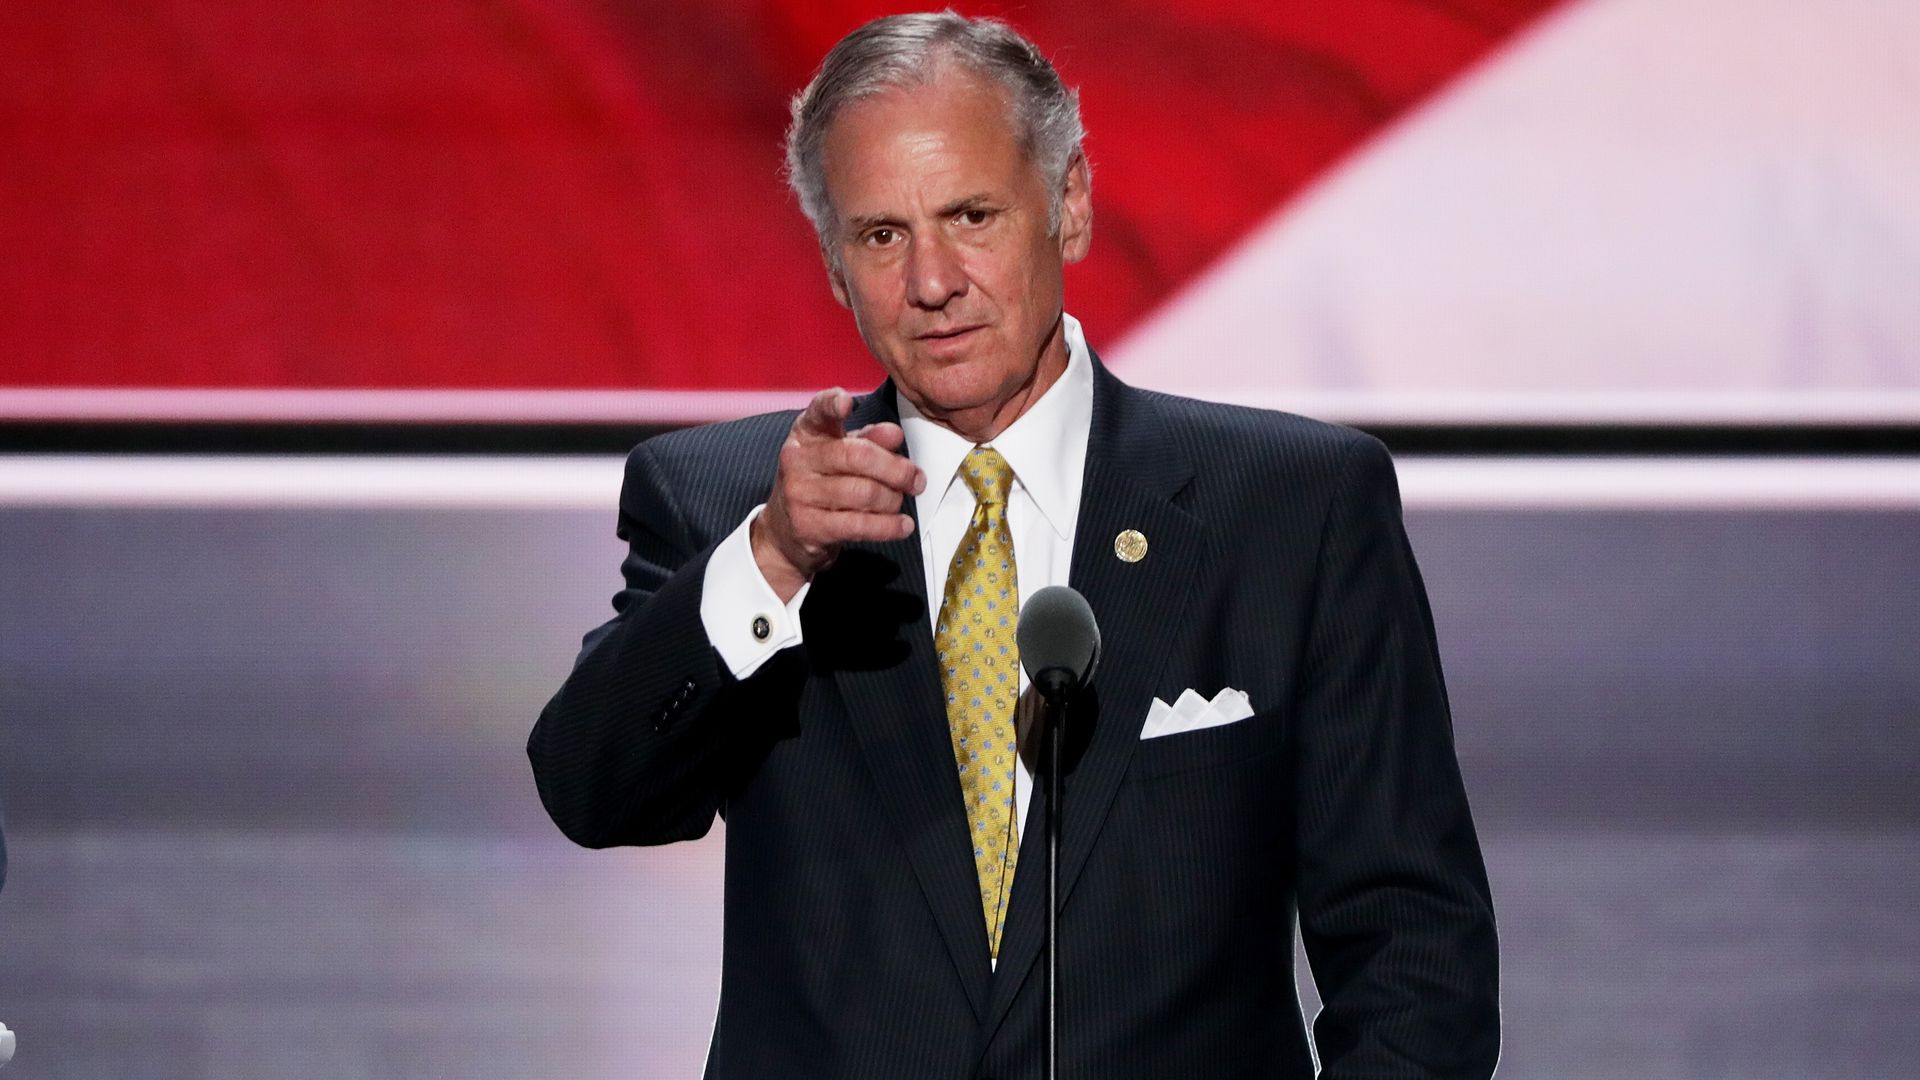 South Carolina governor pointing while standing on stage